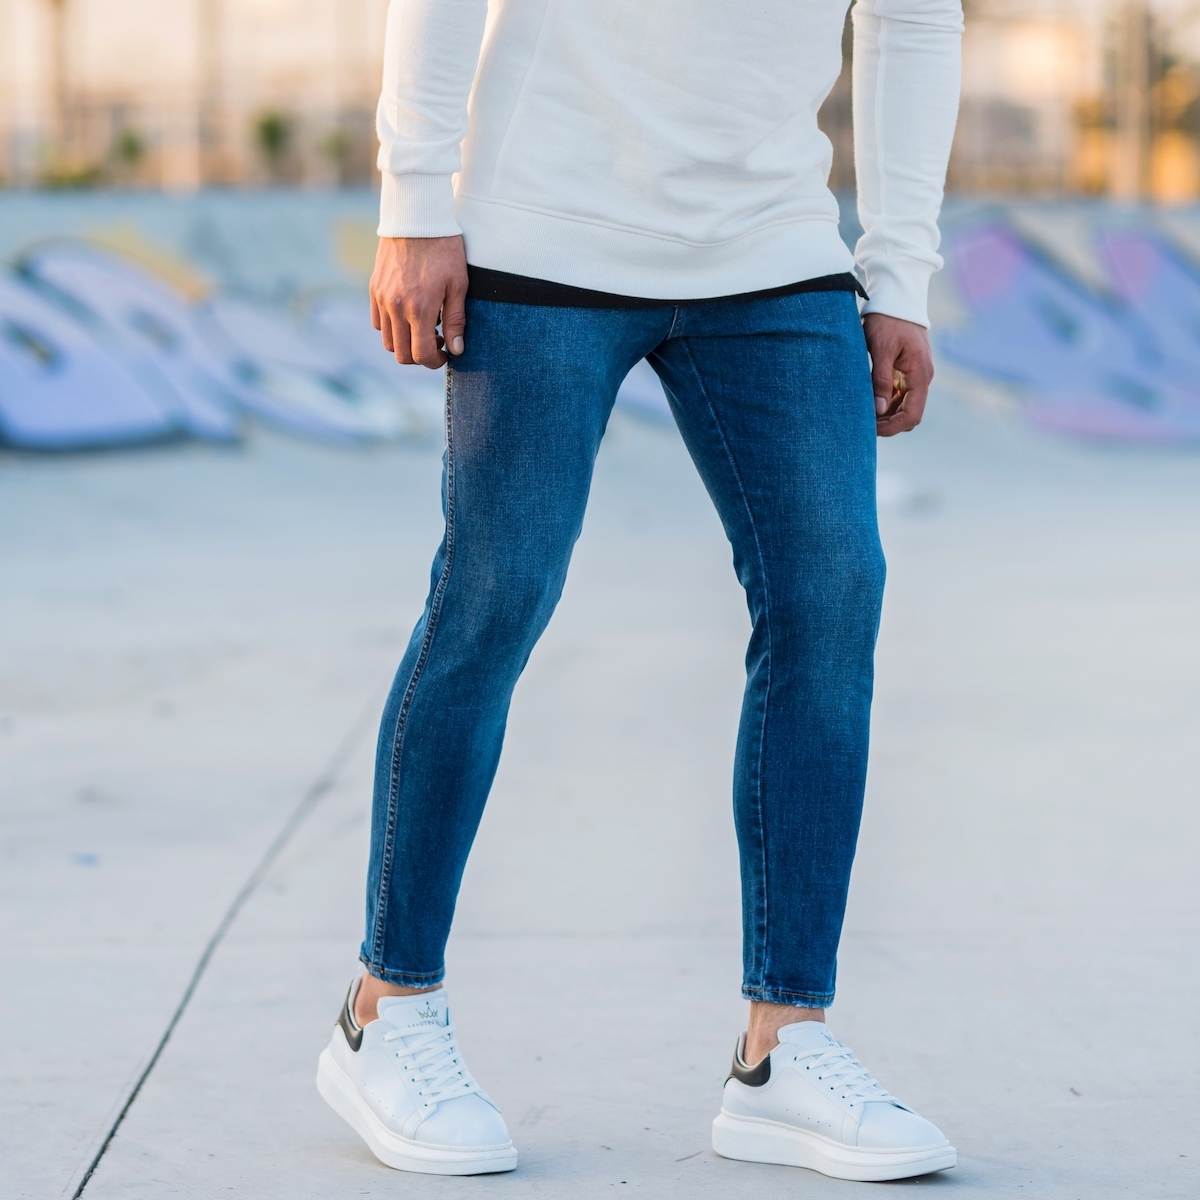 ankle jeans and sneakers